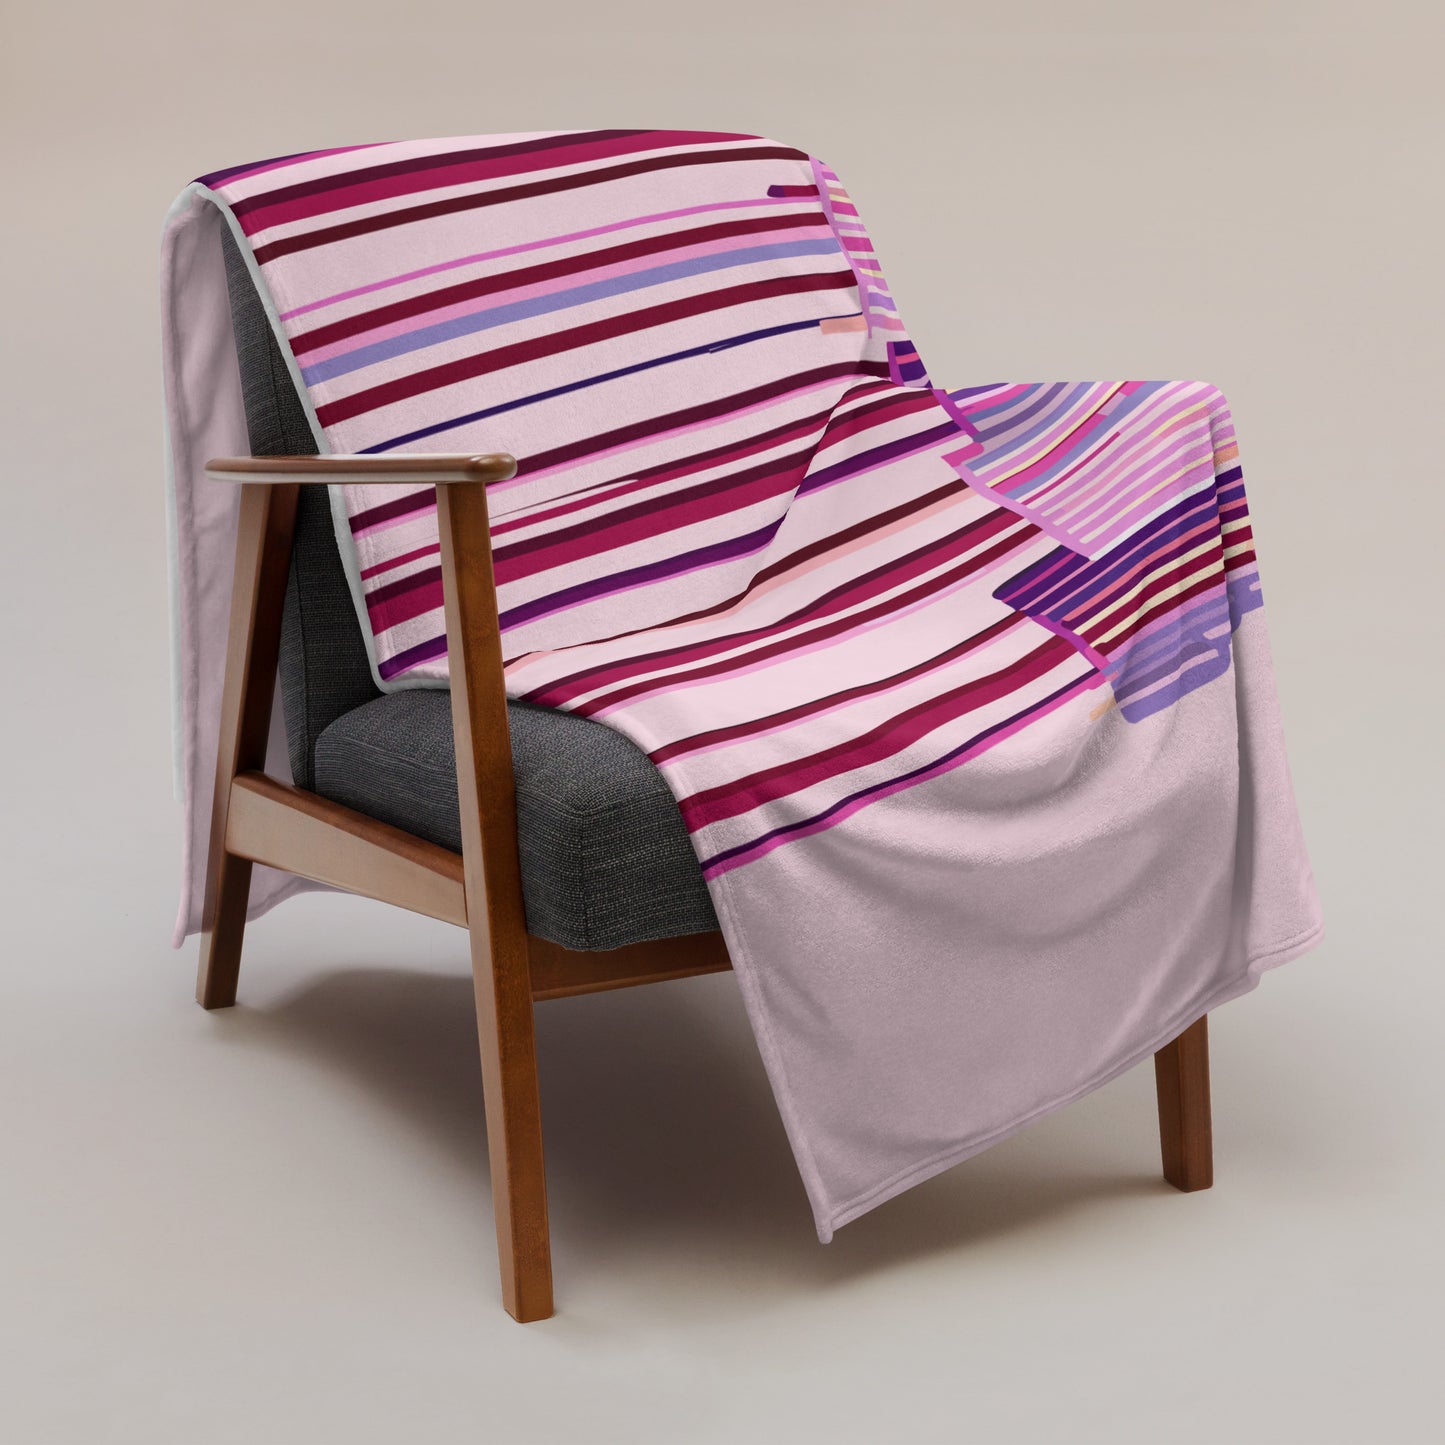 Soft silky blanket in pink with cool popcicle forest design in various berry colors, 60in x 80in